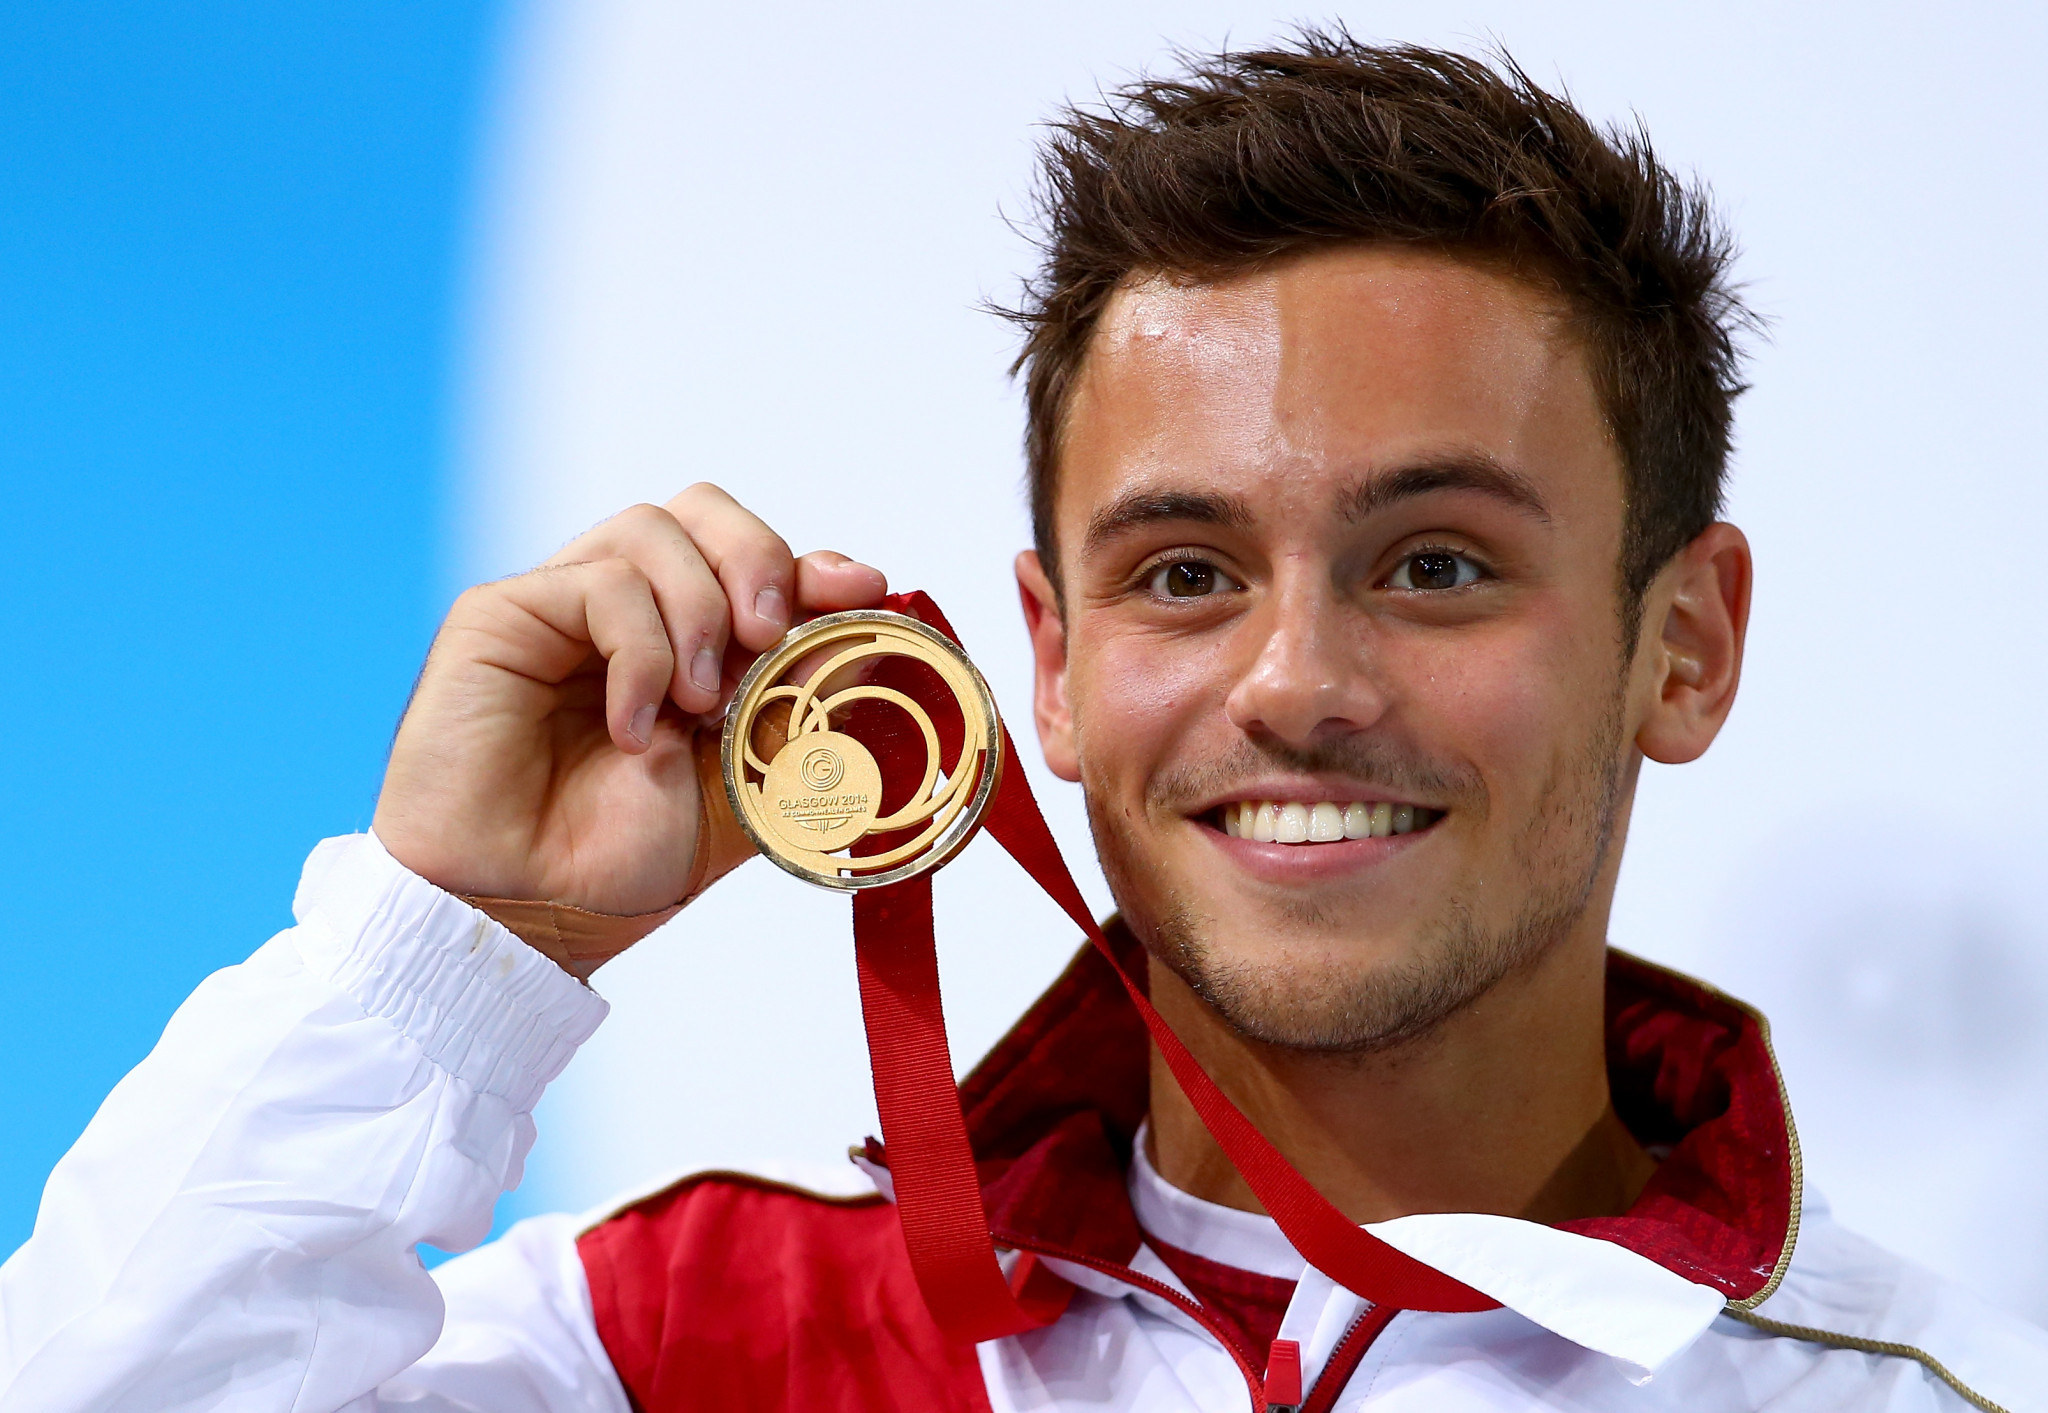 Tom Daley has won three Commonwealth Games gold medals in his career ©Getty Images